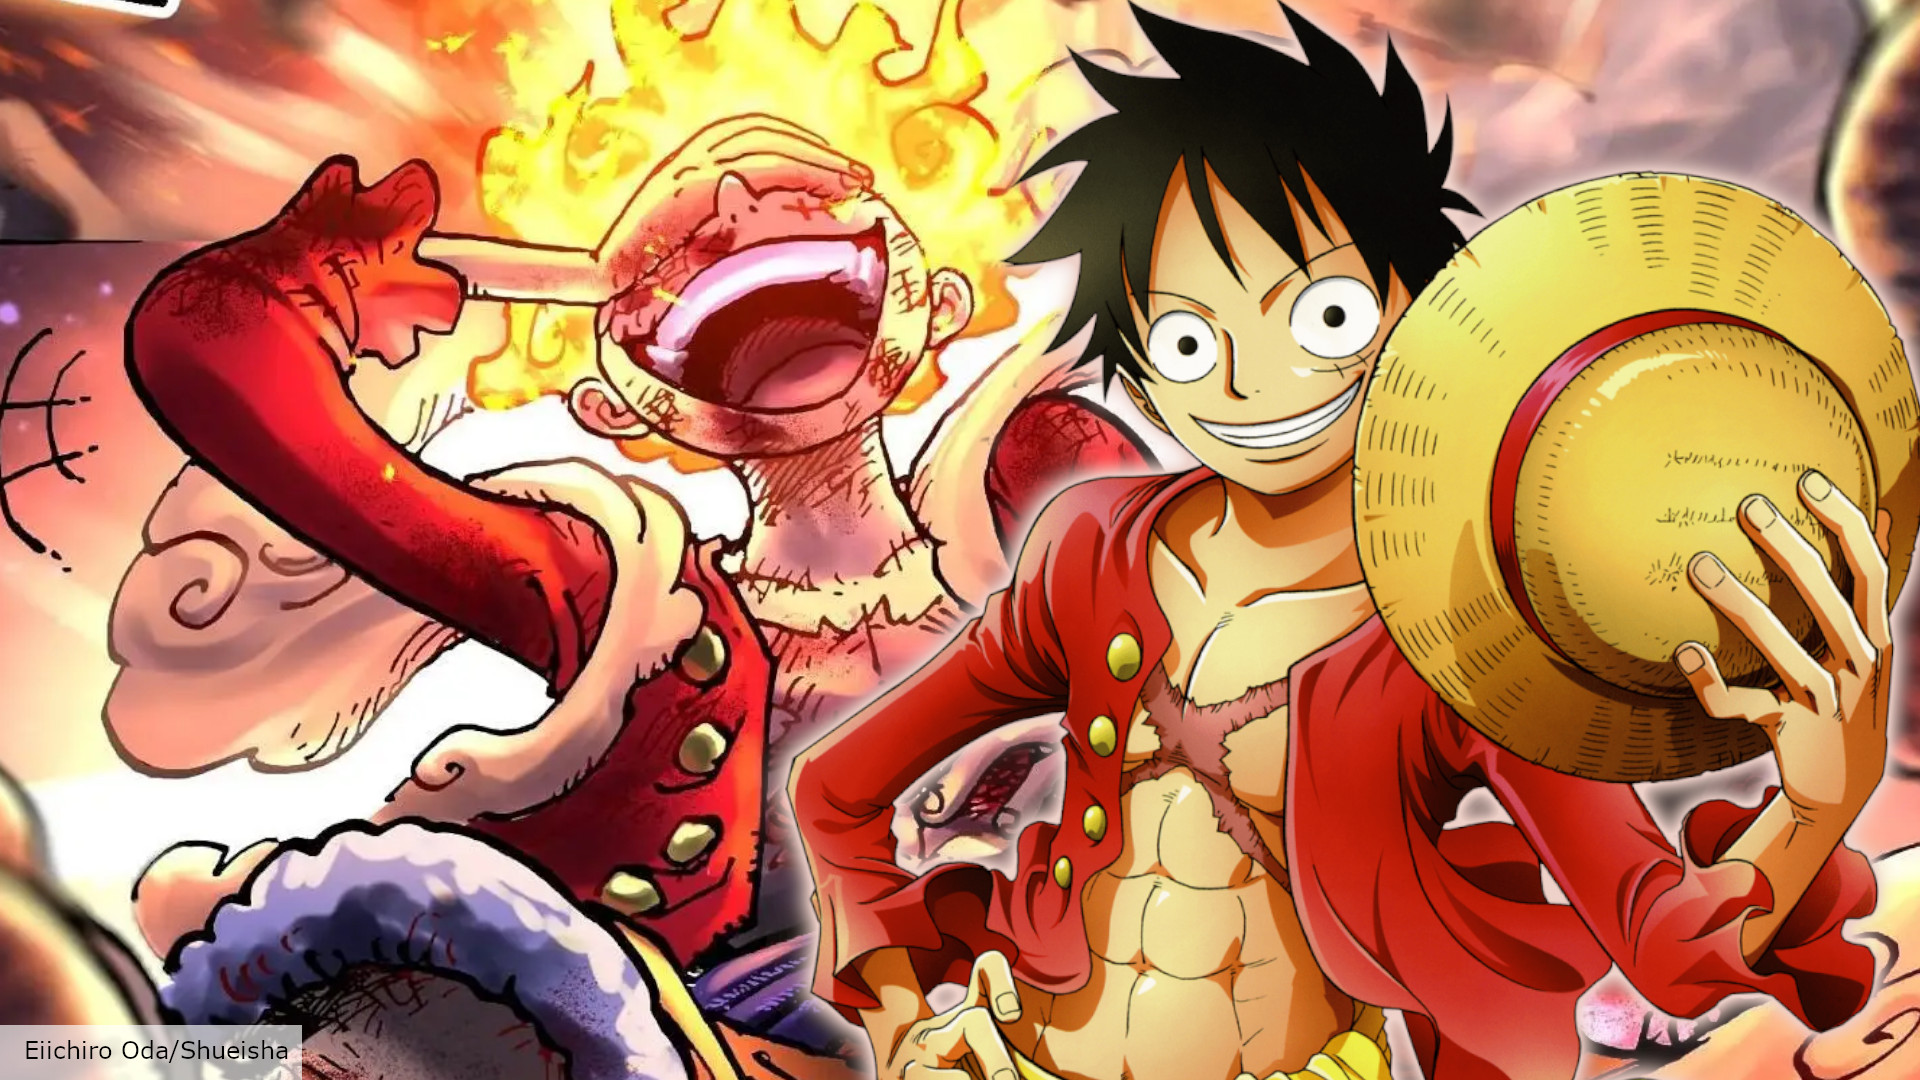 One Piece Anime Teases Luffy Gear 5 in New Trailer - Anime Corner